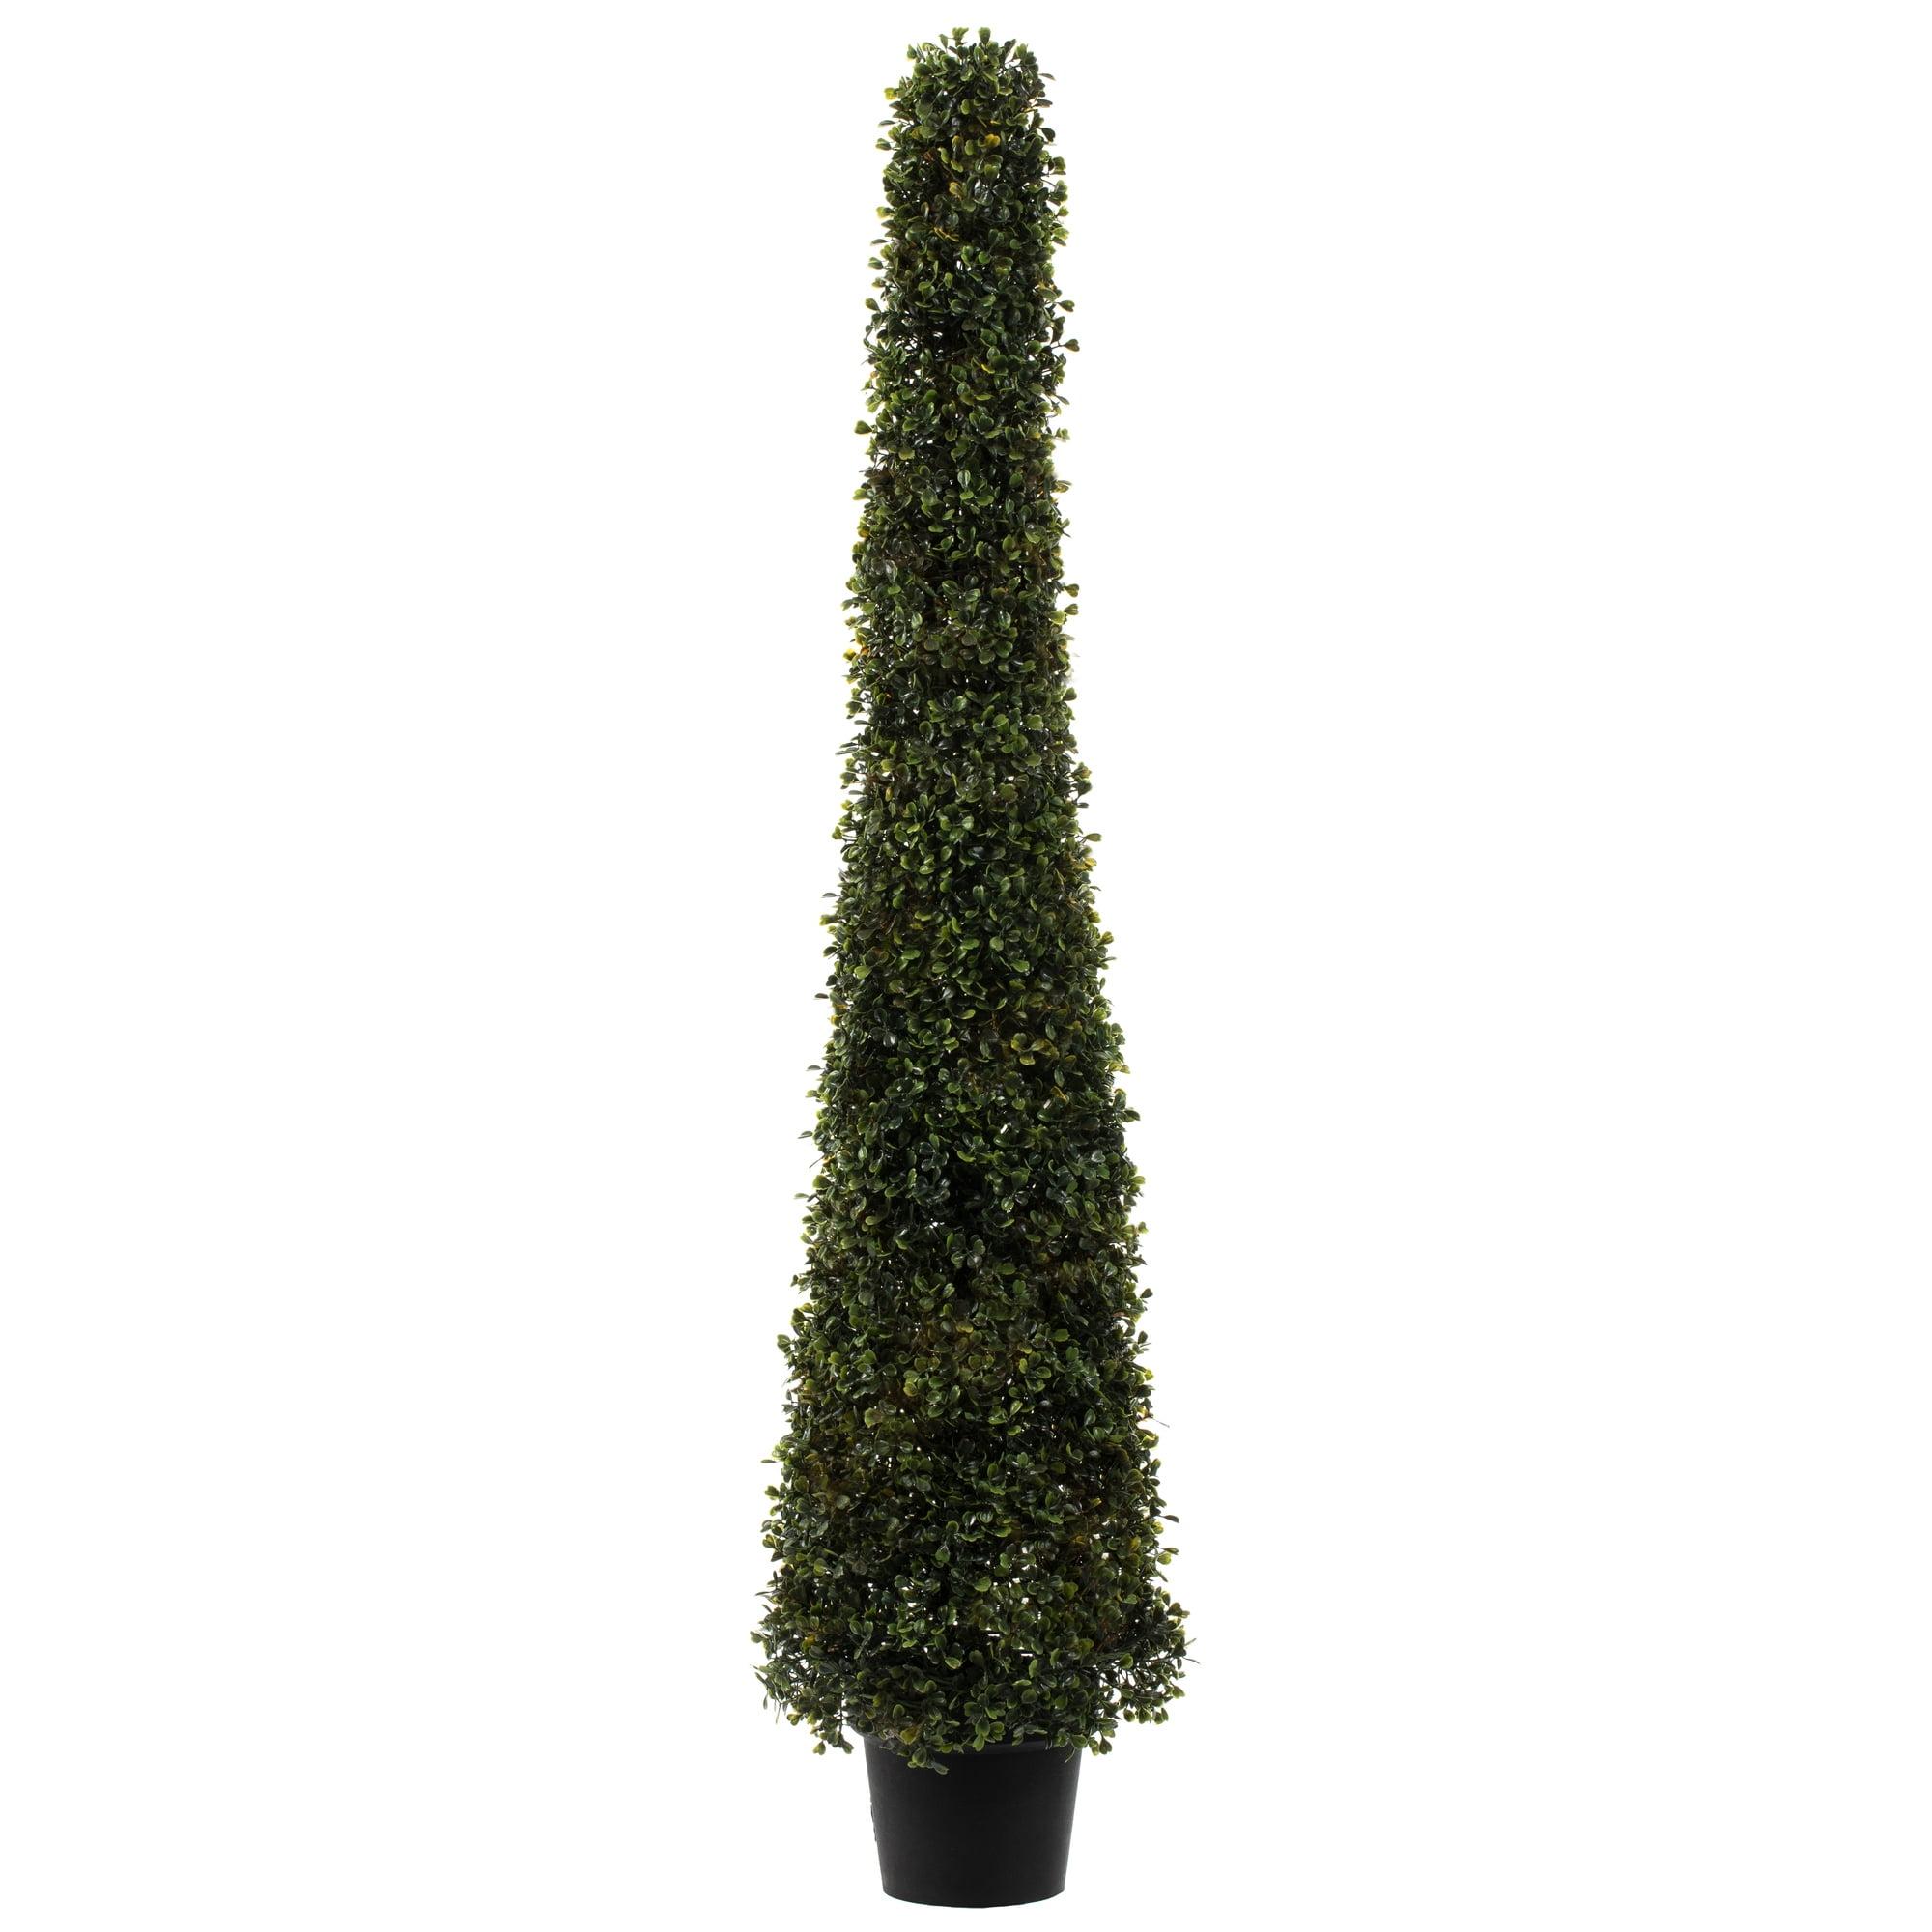 Festive Outdoor 4' Potted Boxwood Topiary in Plastic Pot